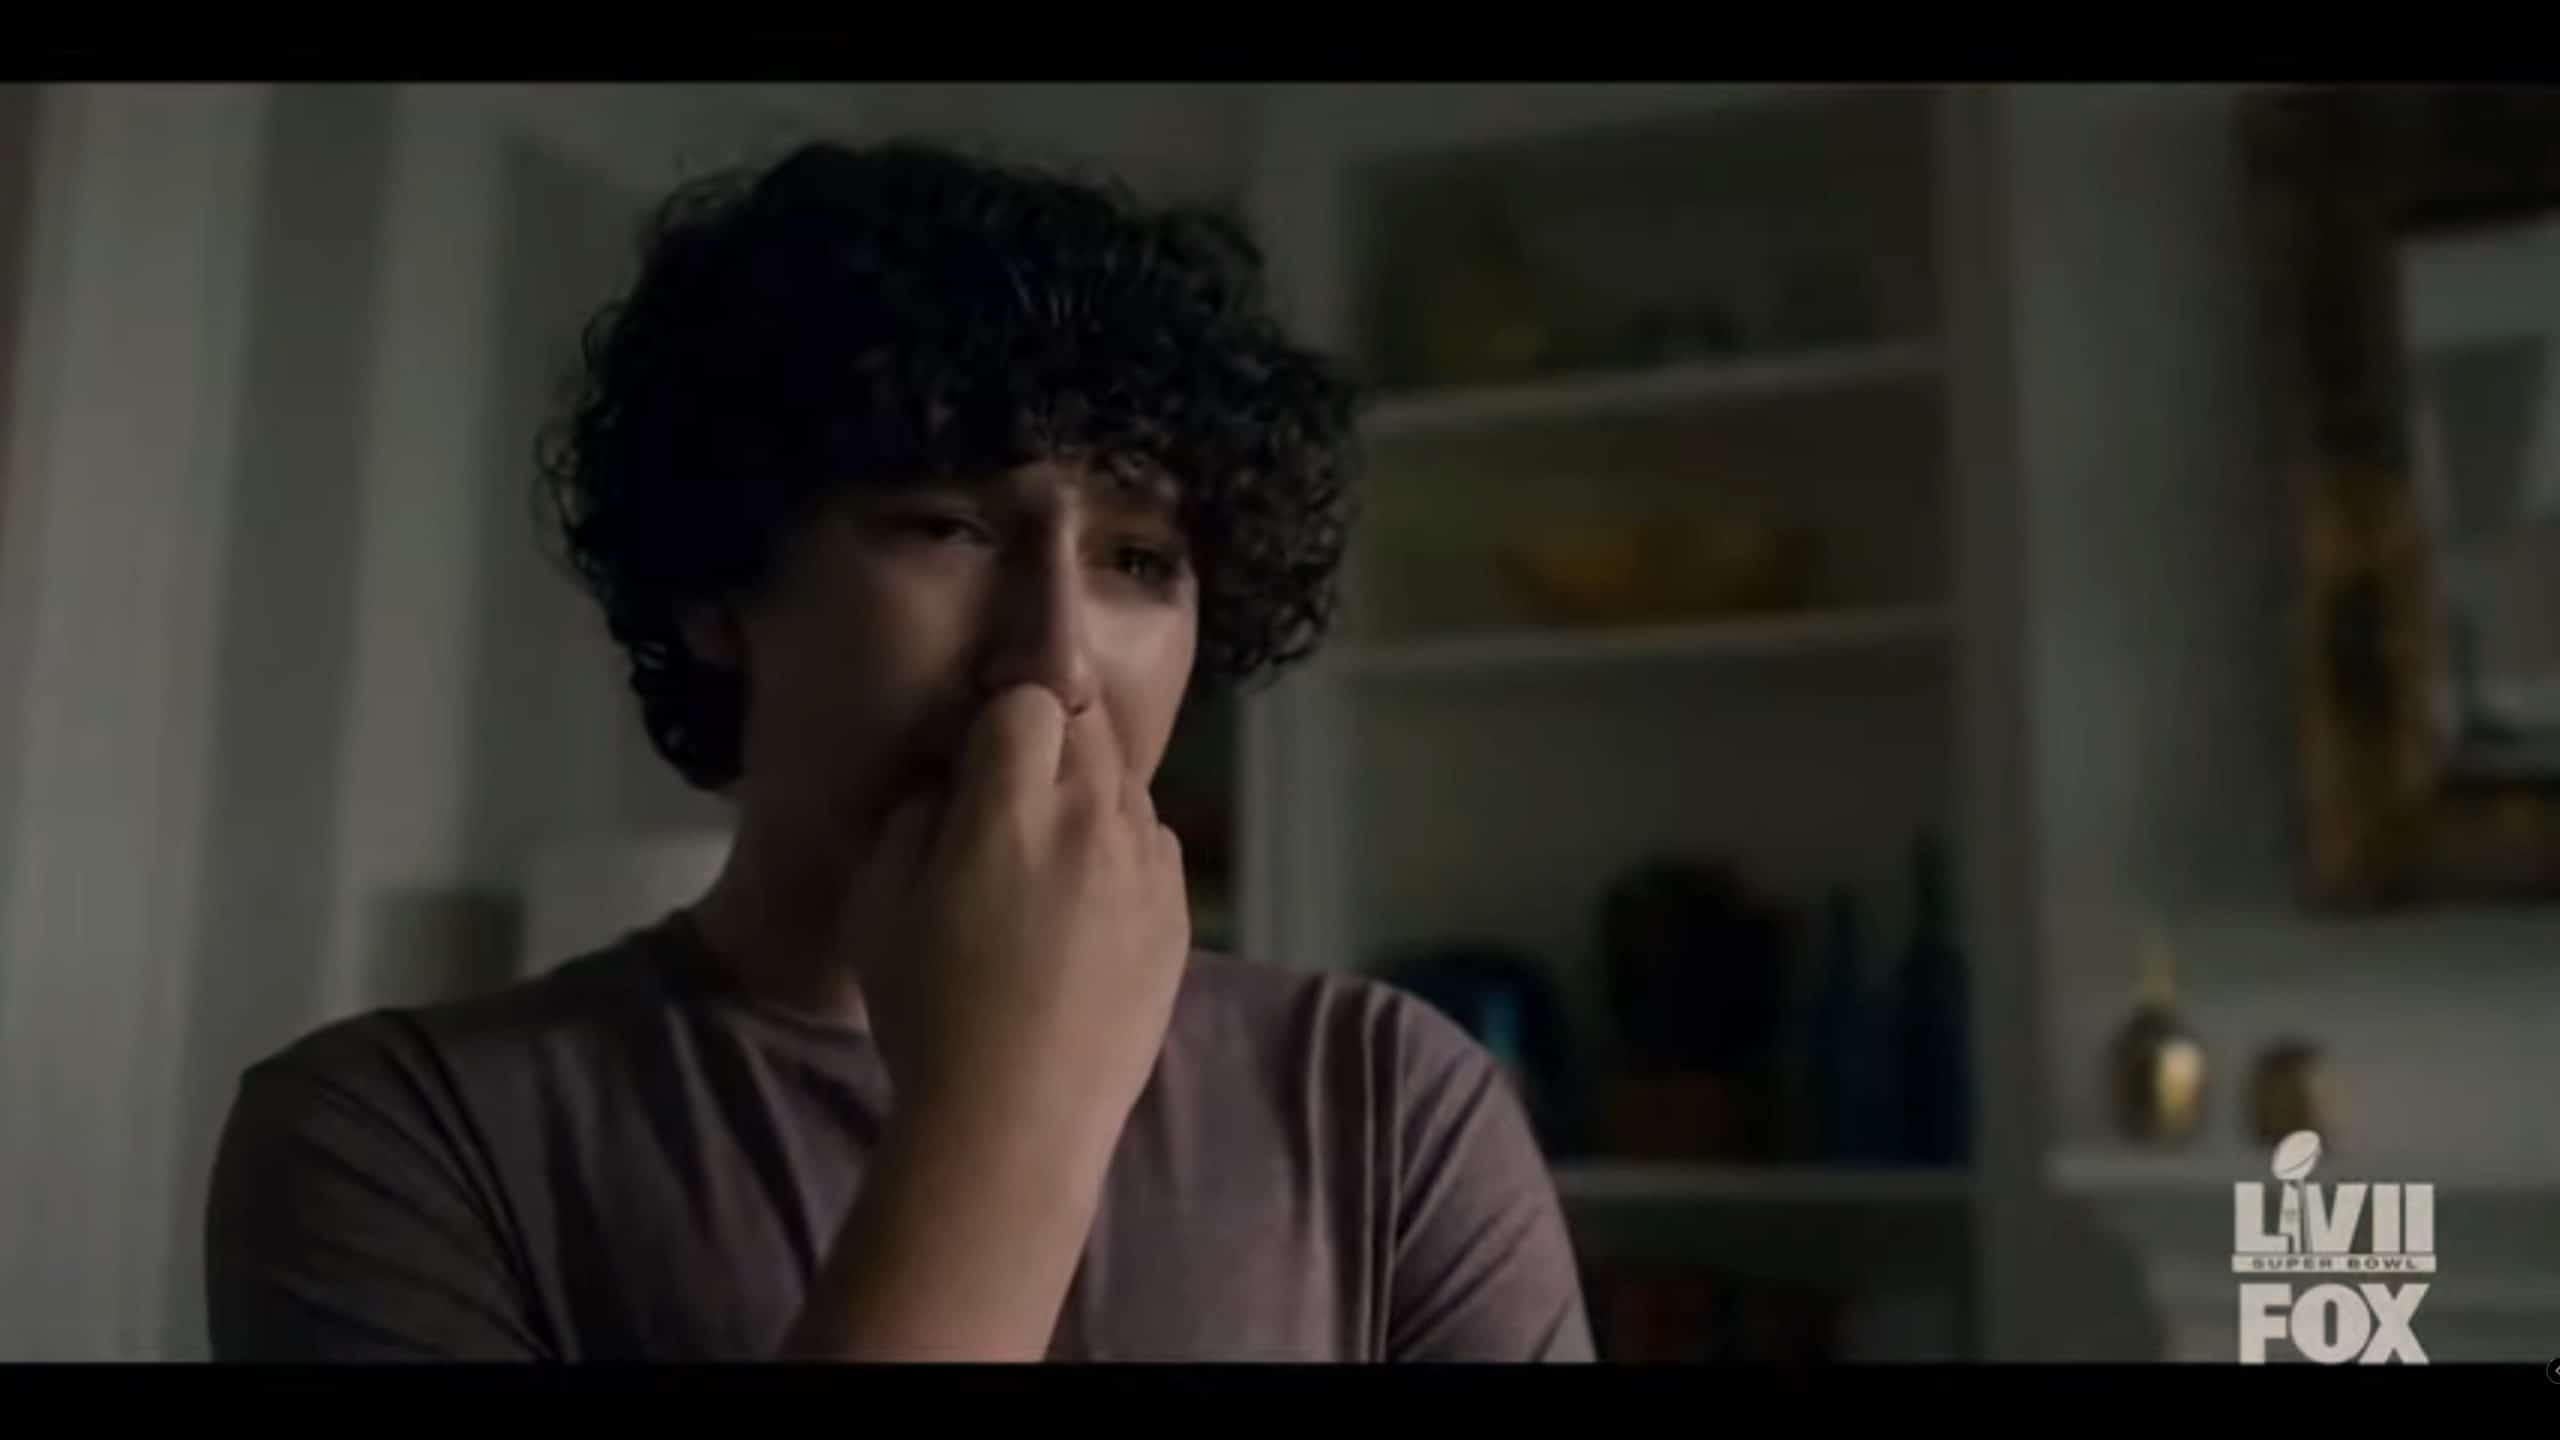 August Maturo as Matthew crying over his mom dying